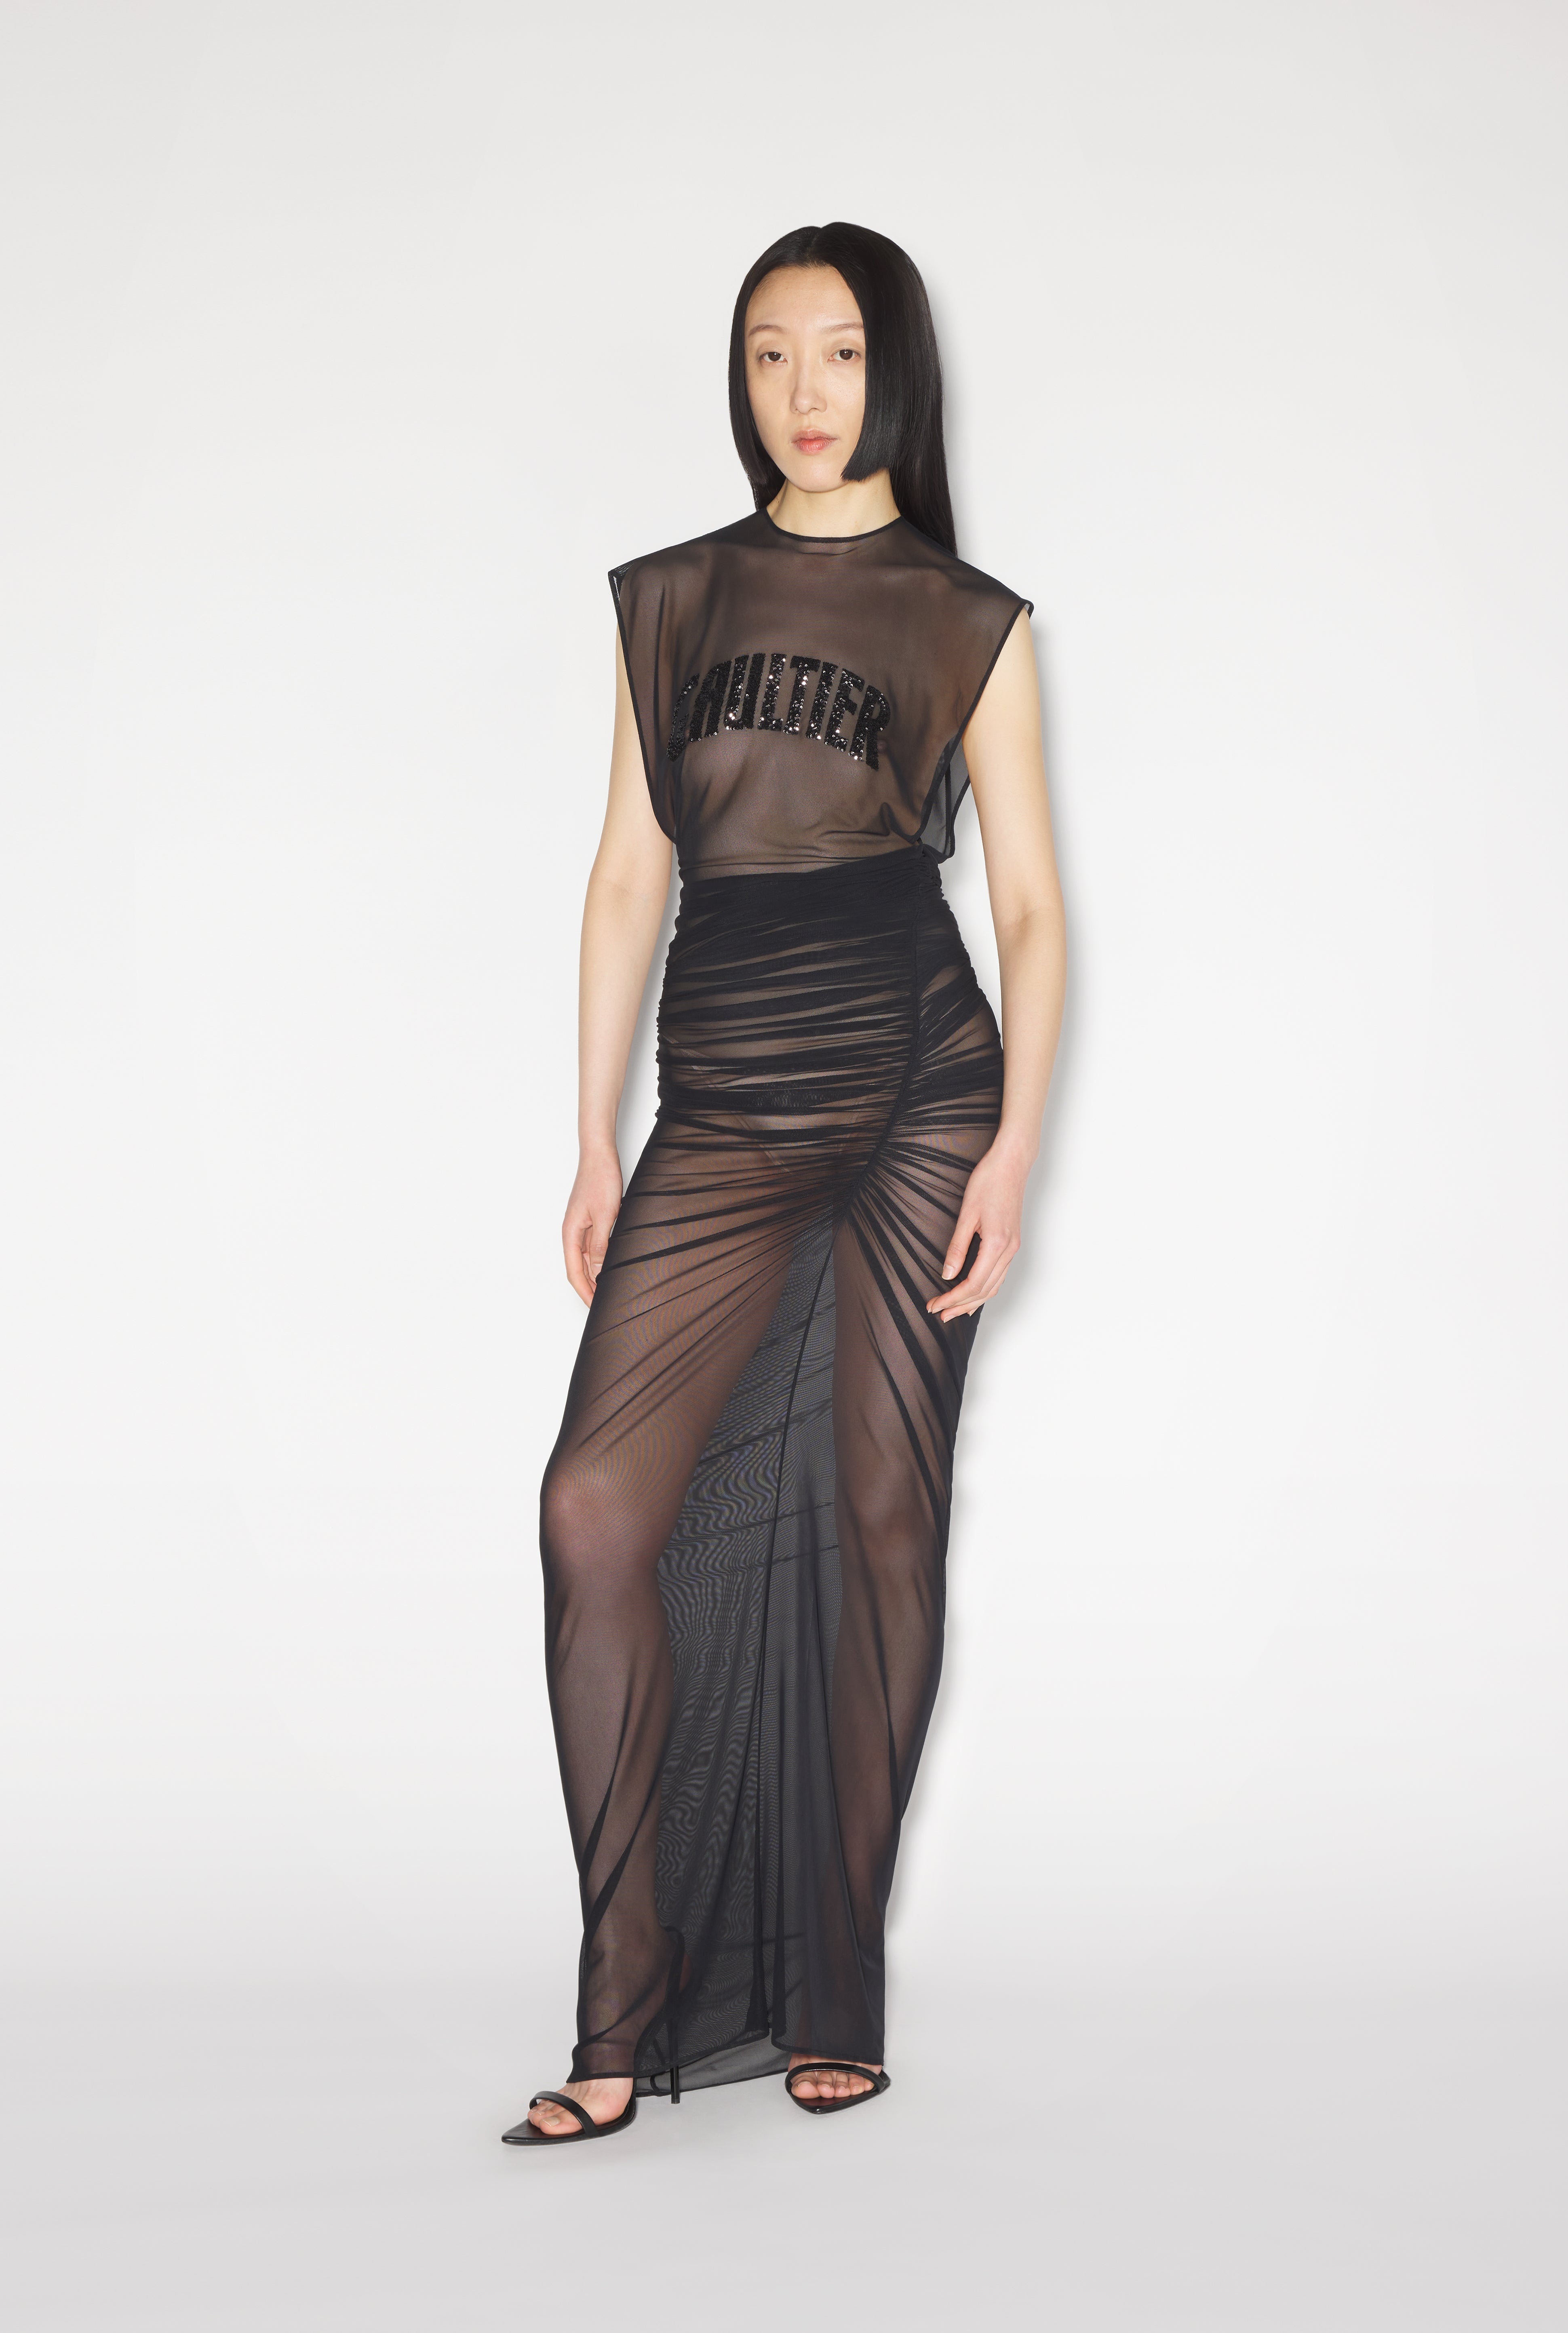 THE GAULTIER TULLE DRESS - 1